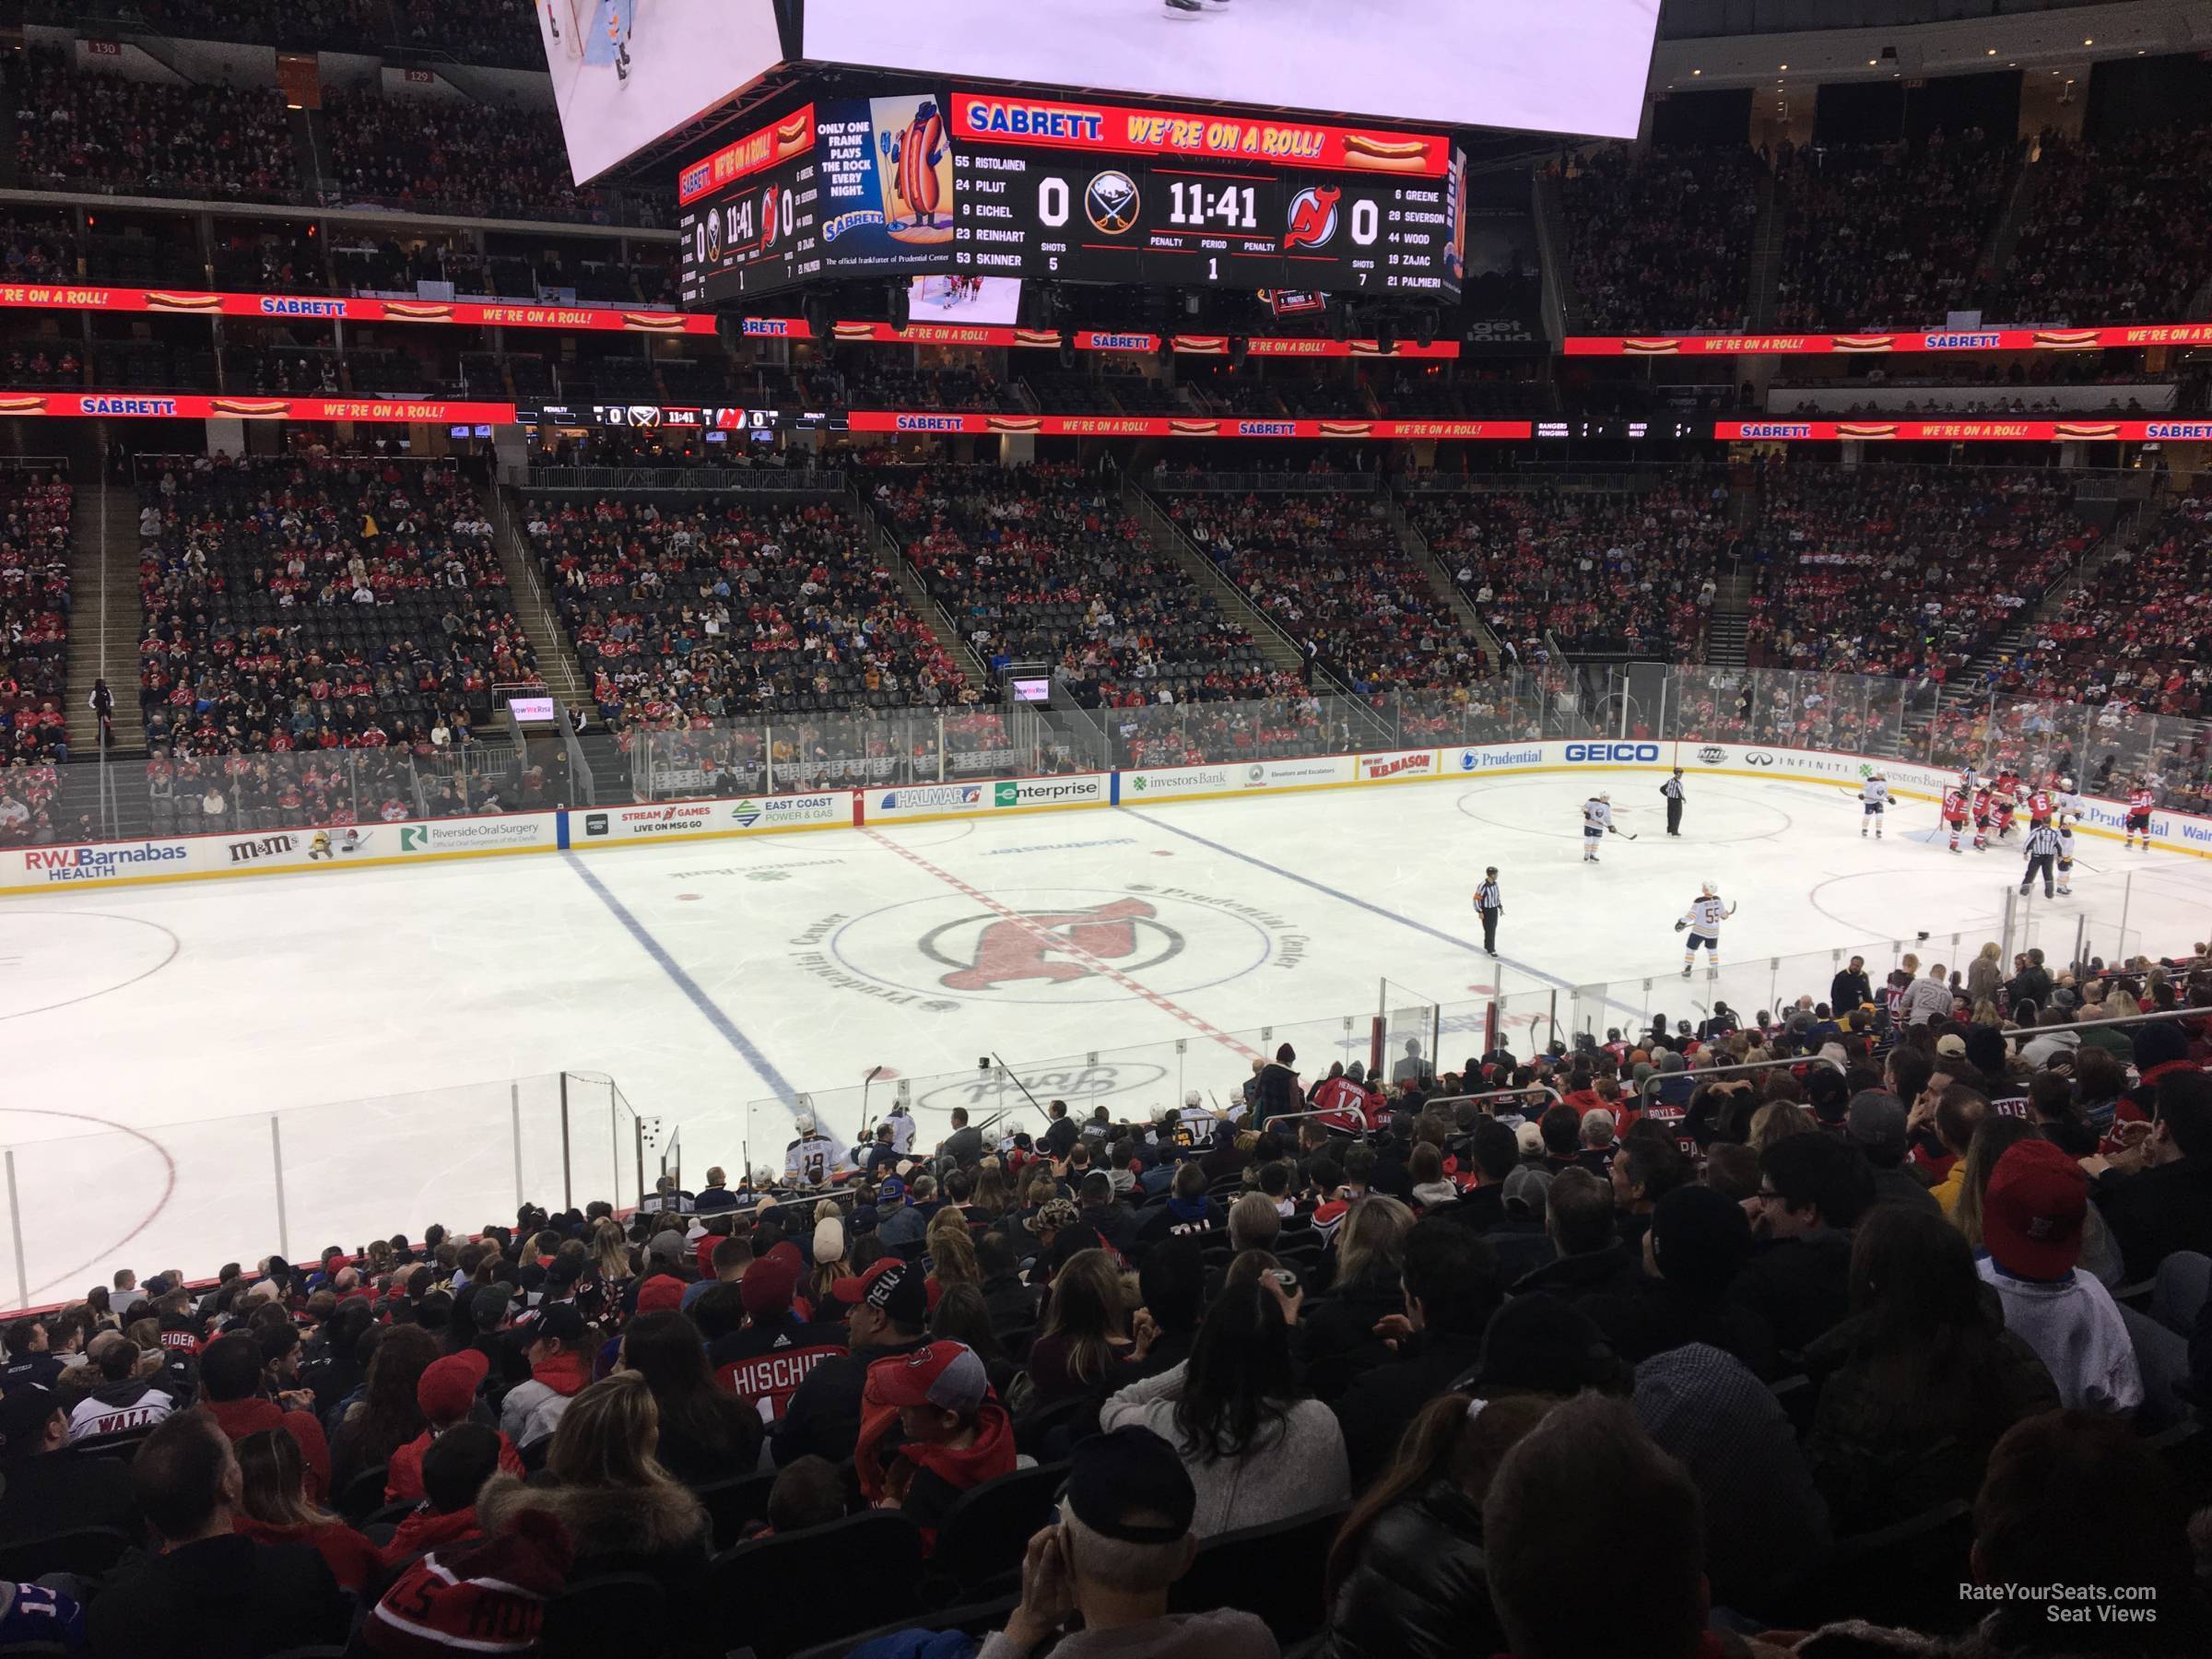 new jersey devils tickets prudential center